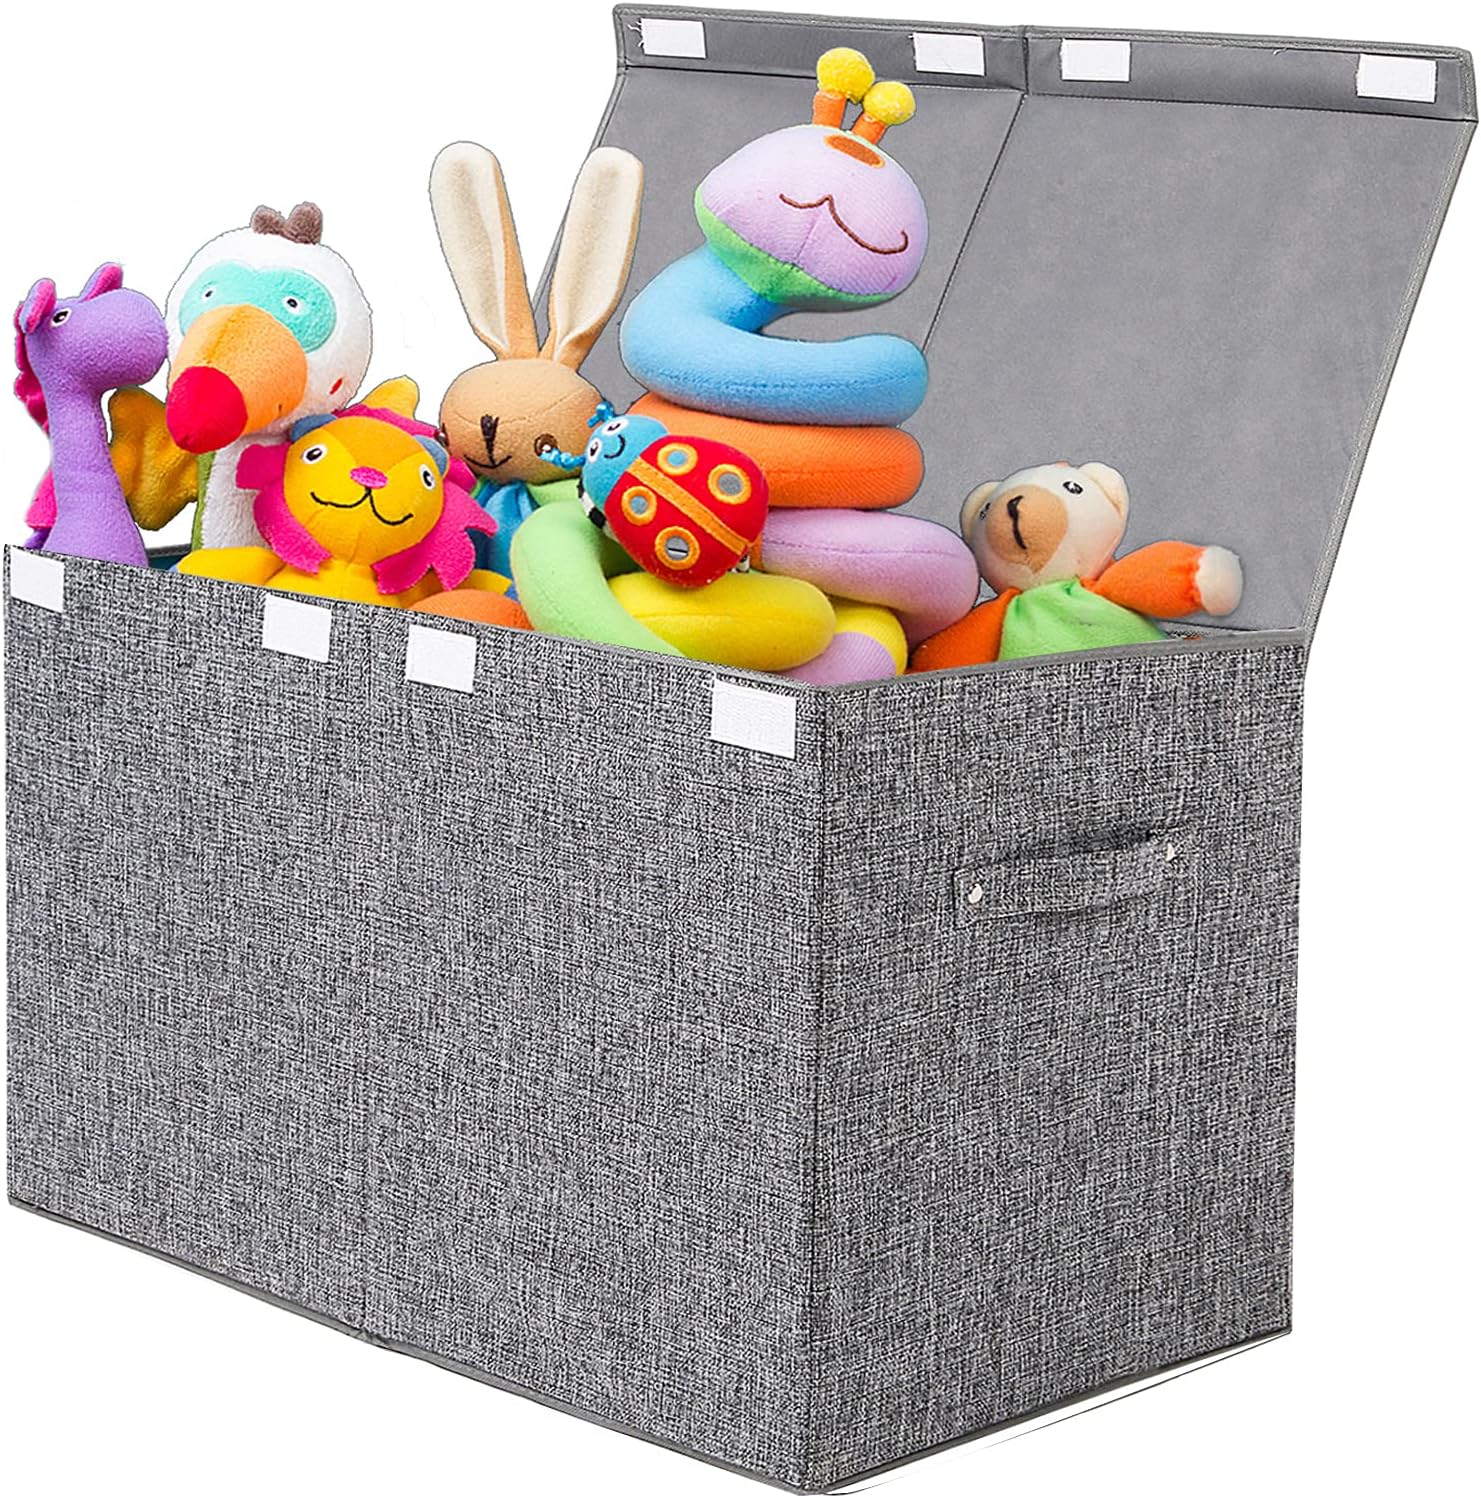 popoly Large Toy Box Chest with Lid, Collapsible Sturdy Toy Storage Organizer Boxes Bins Baskets for Kids, Boys, Girls, Nursery, Playroom, 25x13 x16 (Linen Gray)